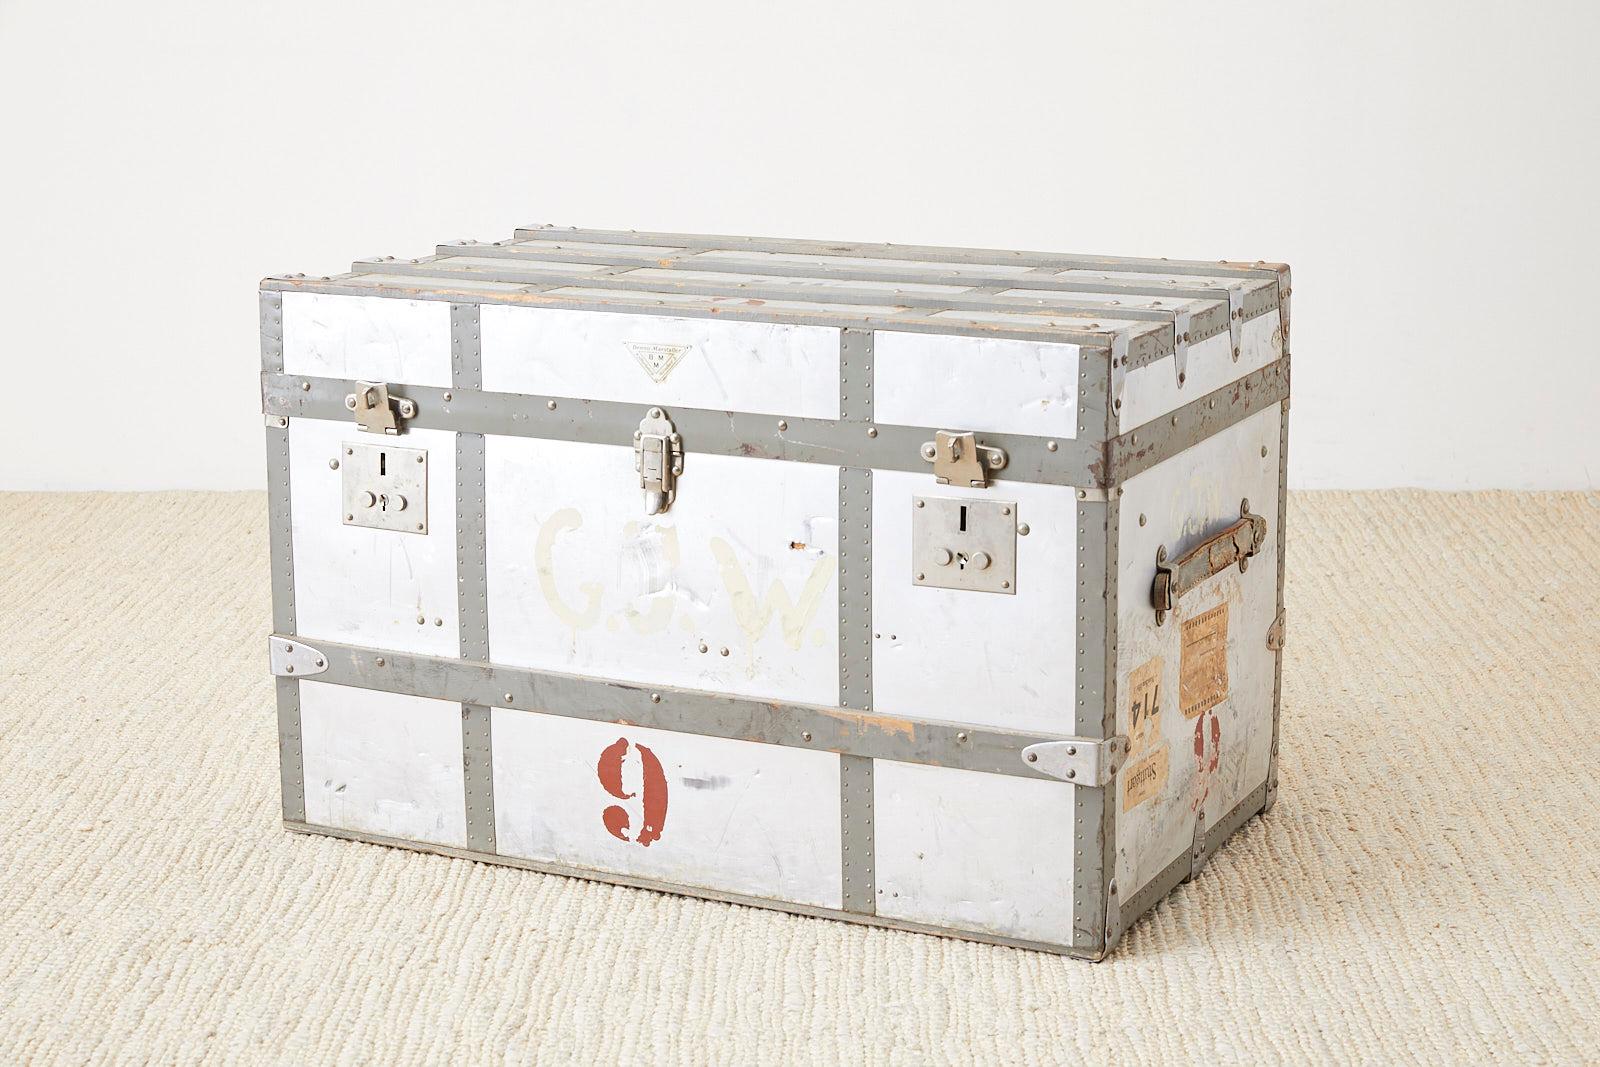 Rare and historic Mid-Century Modern German steamer trunk made by Benno Marstaller in Munich, Germany. Interestingly this trunk belonged to George Jurgen Wittenstein (1919-2015) who was part of the 